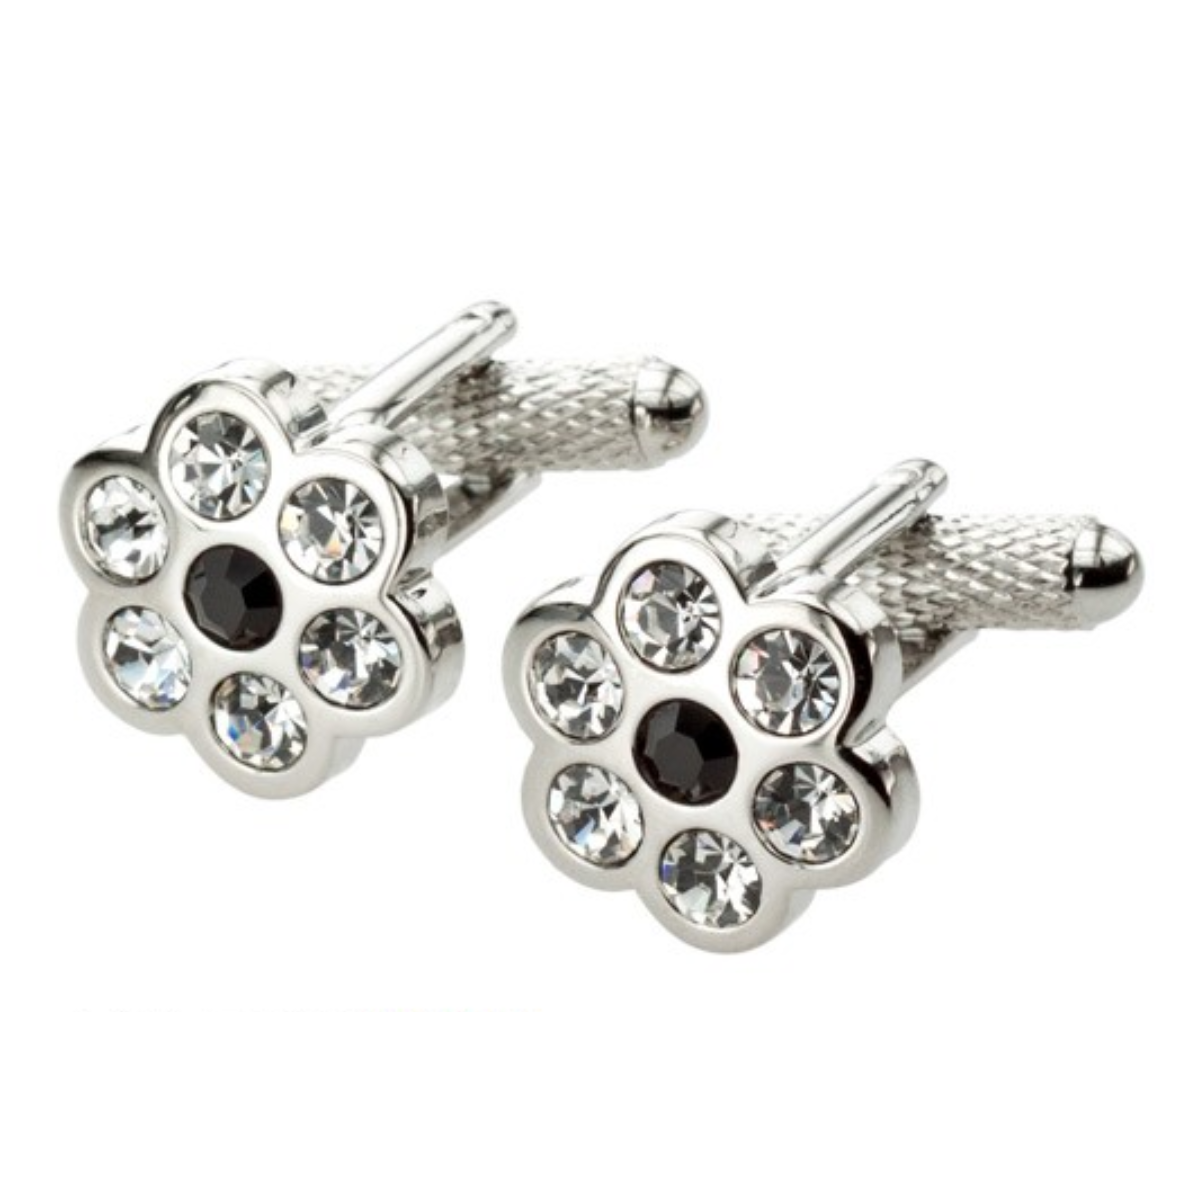 7. Sparkling Crystal Cufflinks: A Unique and Thoughtful Anniversary Gift for Him